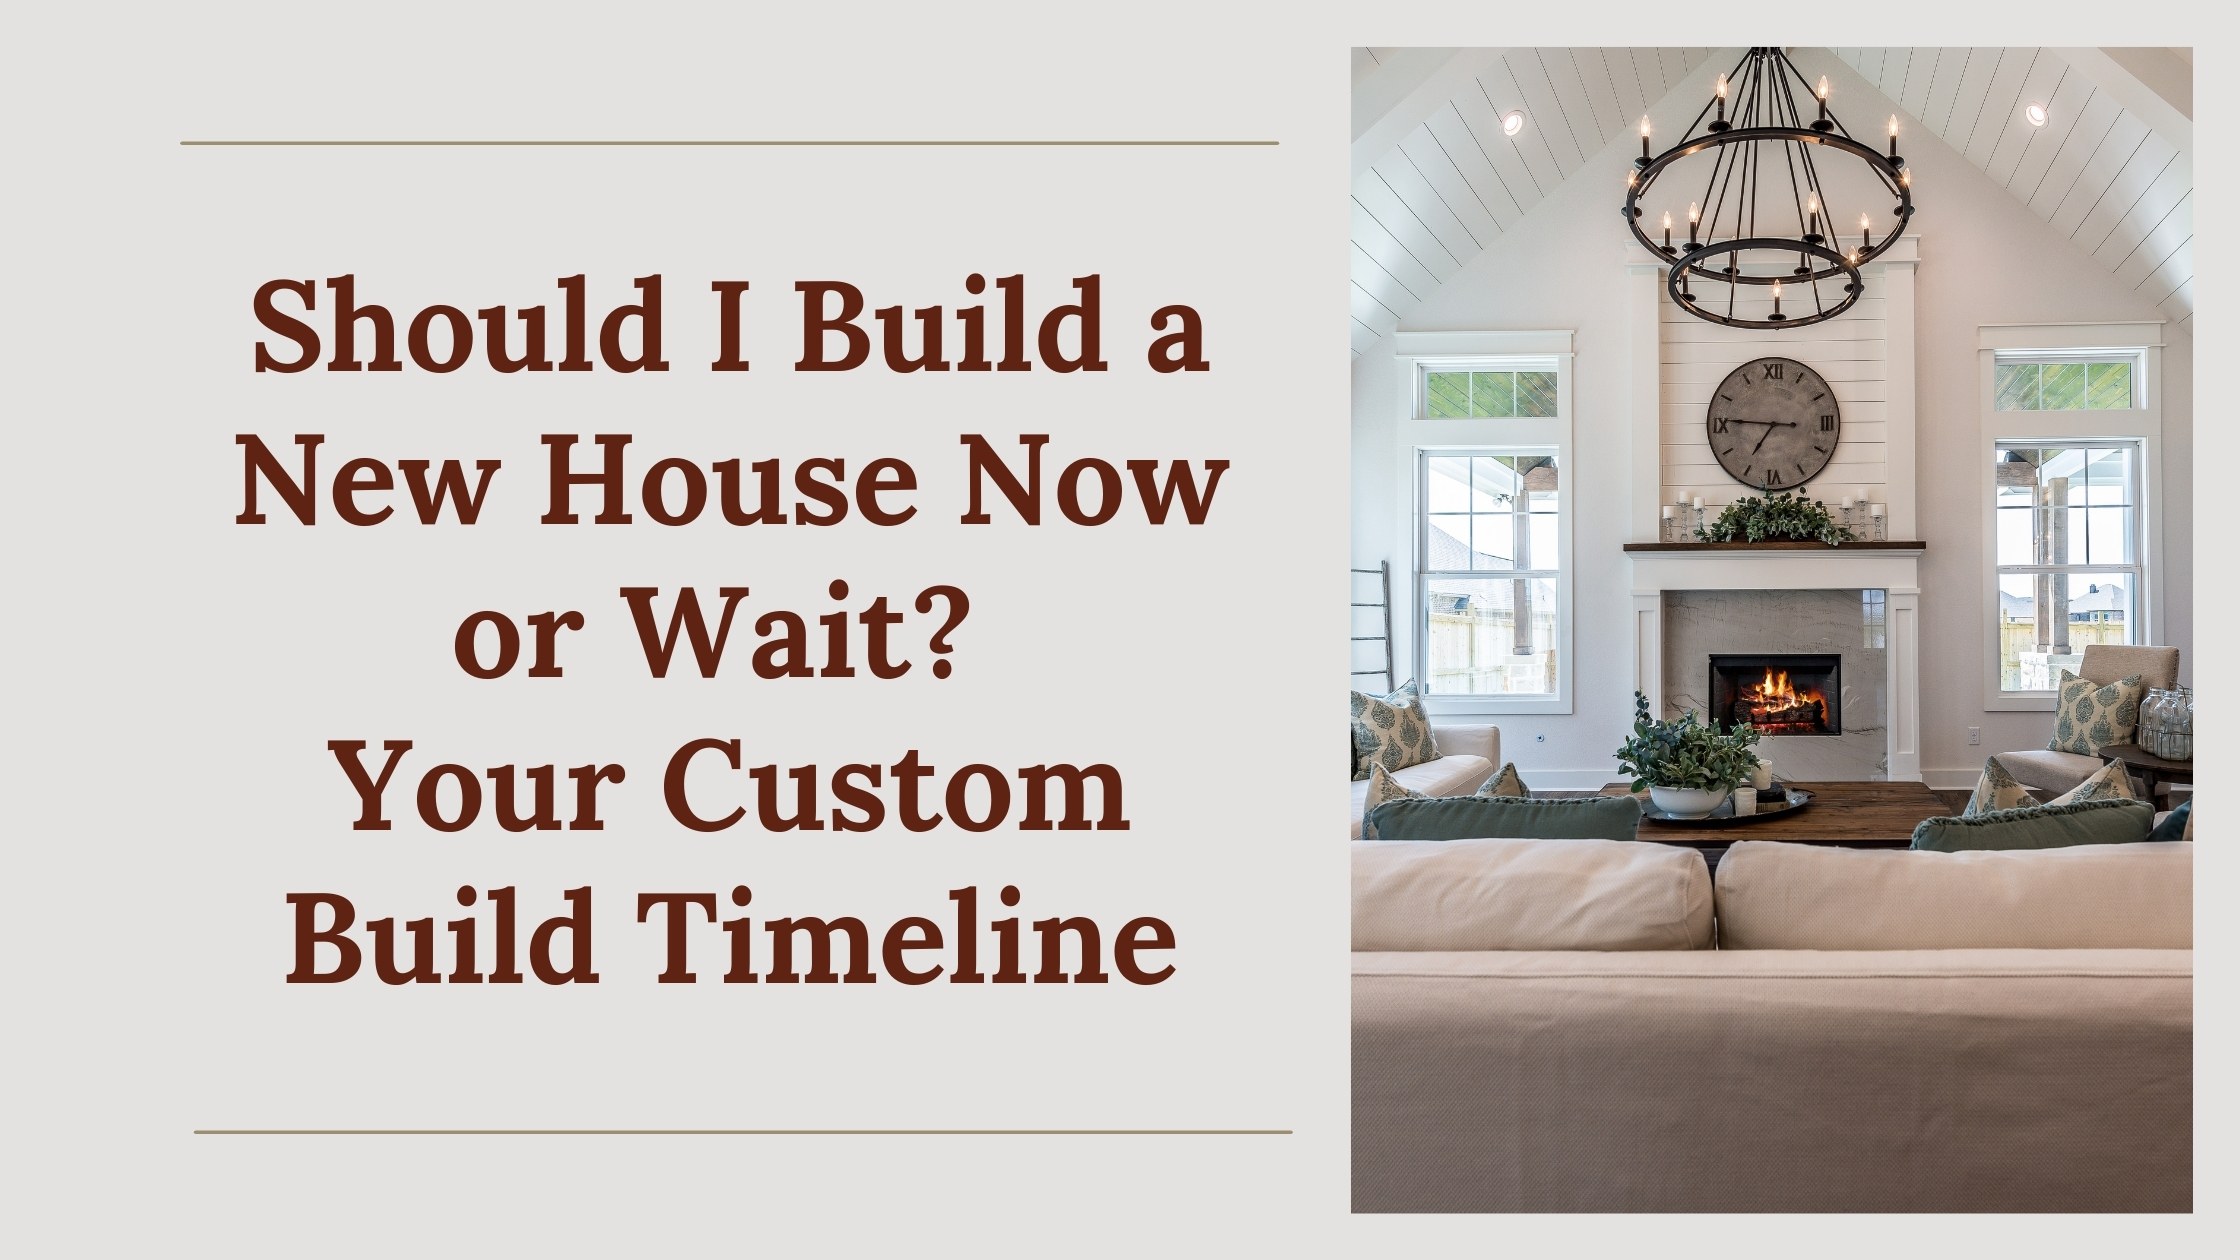 Should I Build a New House Now or Wait? Your Custom Build Timeline